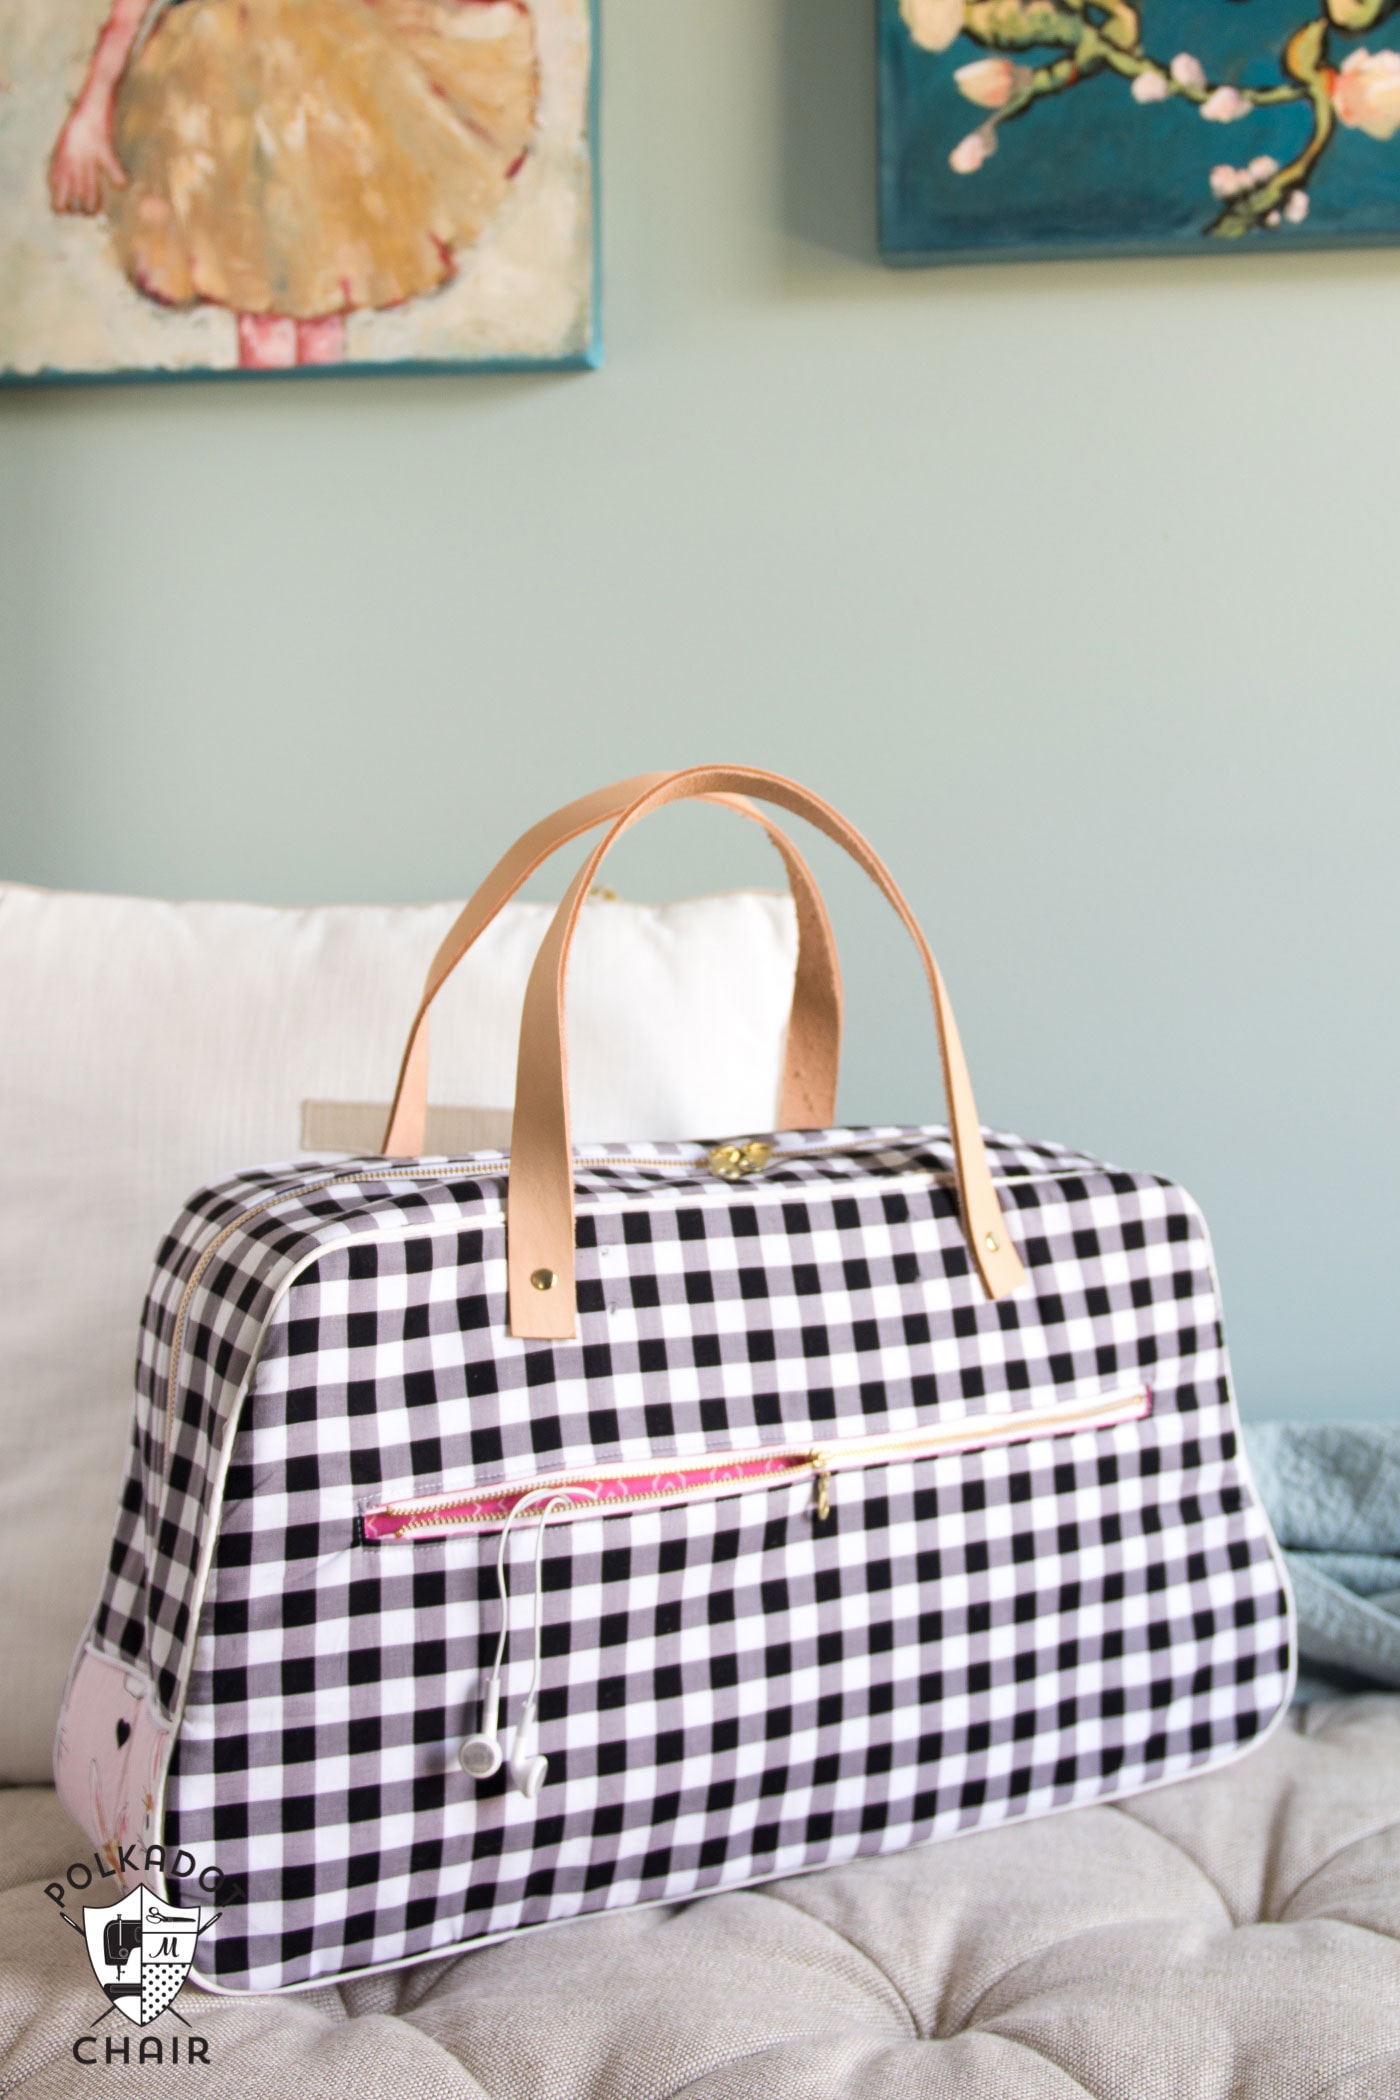 Refreshed Retro Travel Bag Sewing Pattern - The Polka Dot Chair